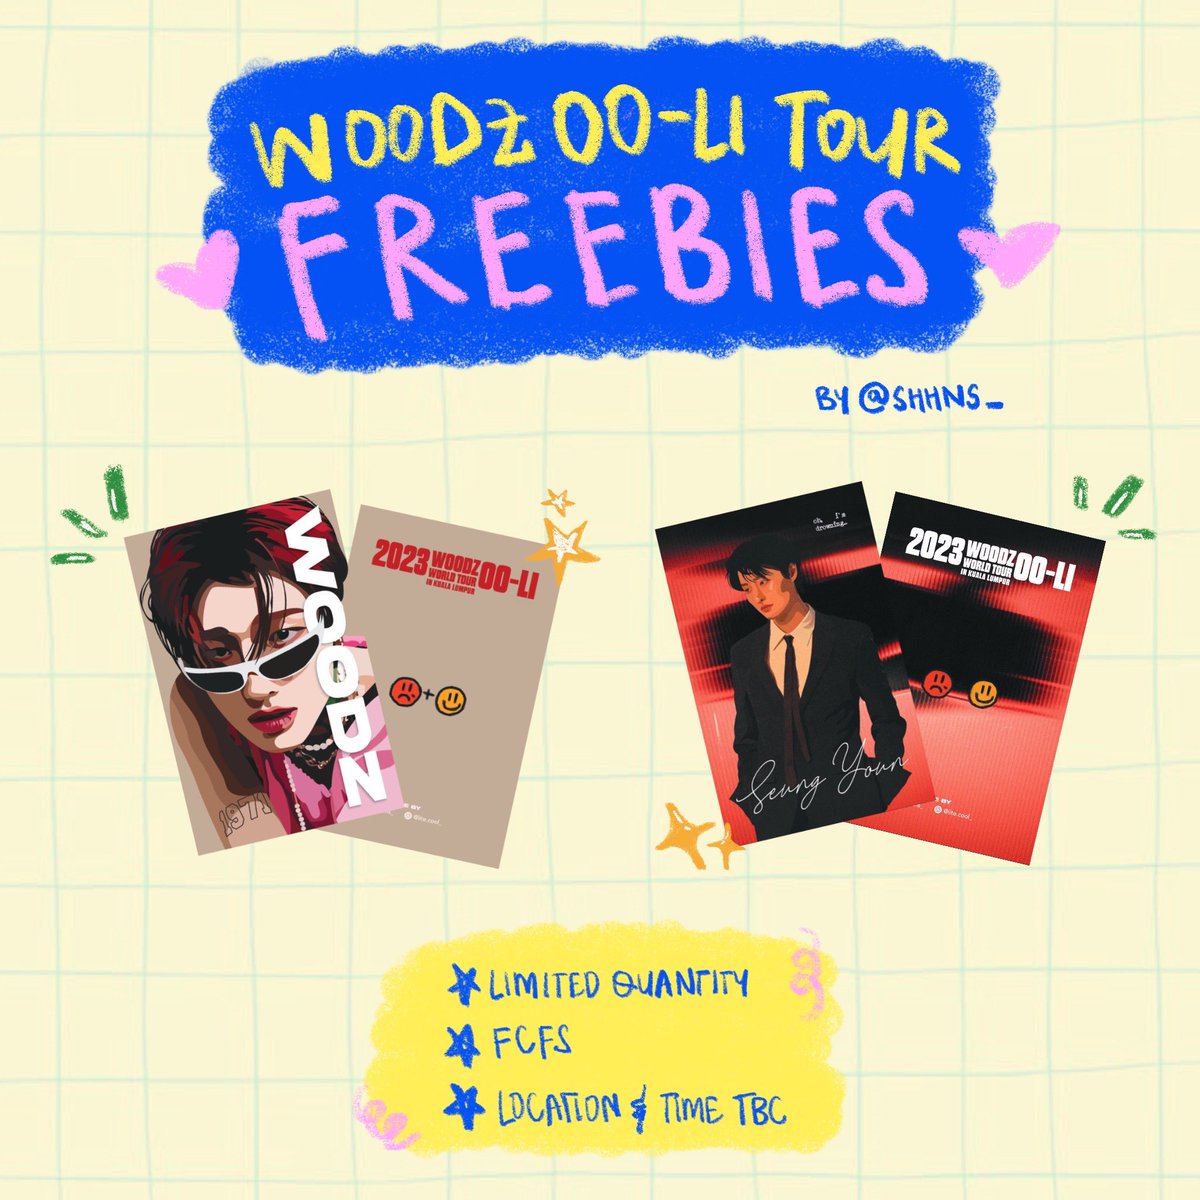 🔸 𝙒𝙊𝙊𝘿𝙕 𝙊𝙊-𝙇𝙞 𝙒𝙤𝙧𝙡𝙙 𝙏𝙤𝙪𝙧 𝙞𝙣 𝙆𝙇 𝙁𝙧𝙚𝙚𝙗𝙞𝙚𝙨 🔹

✨Limited quantity
✨FCFS
✨Location and time will be updated here (or yall can dm me on the day itself)

See yall there 🤗

#WOODZ_WORLD_TOUR #OO_LI_KL #OOLIinKL #WOODZ_in_KualaLumpur #WOODZinKL